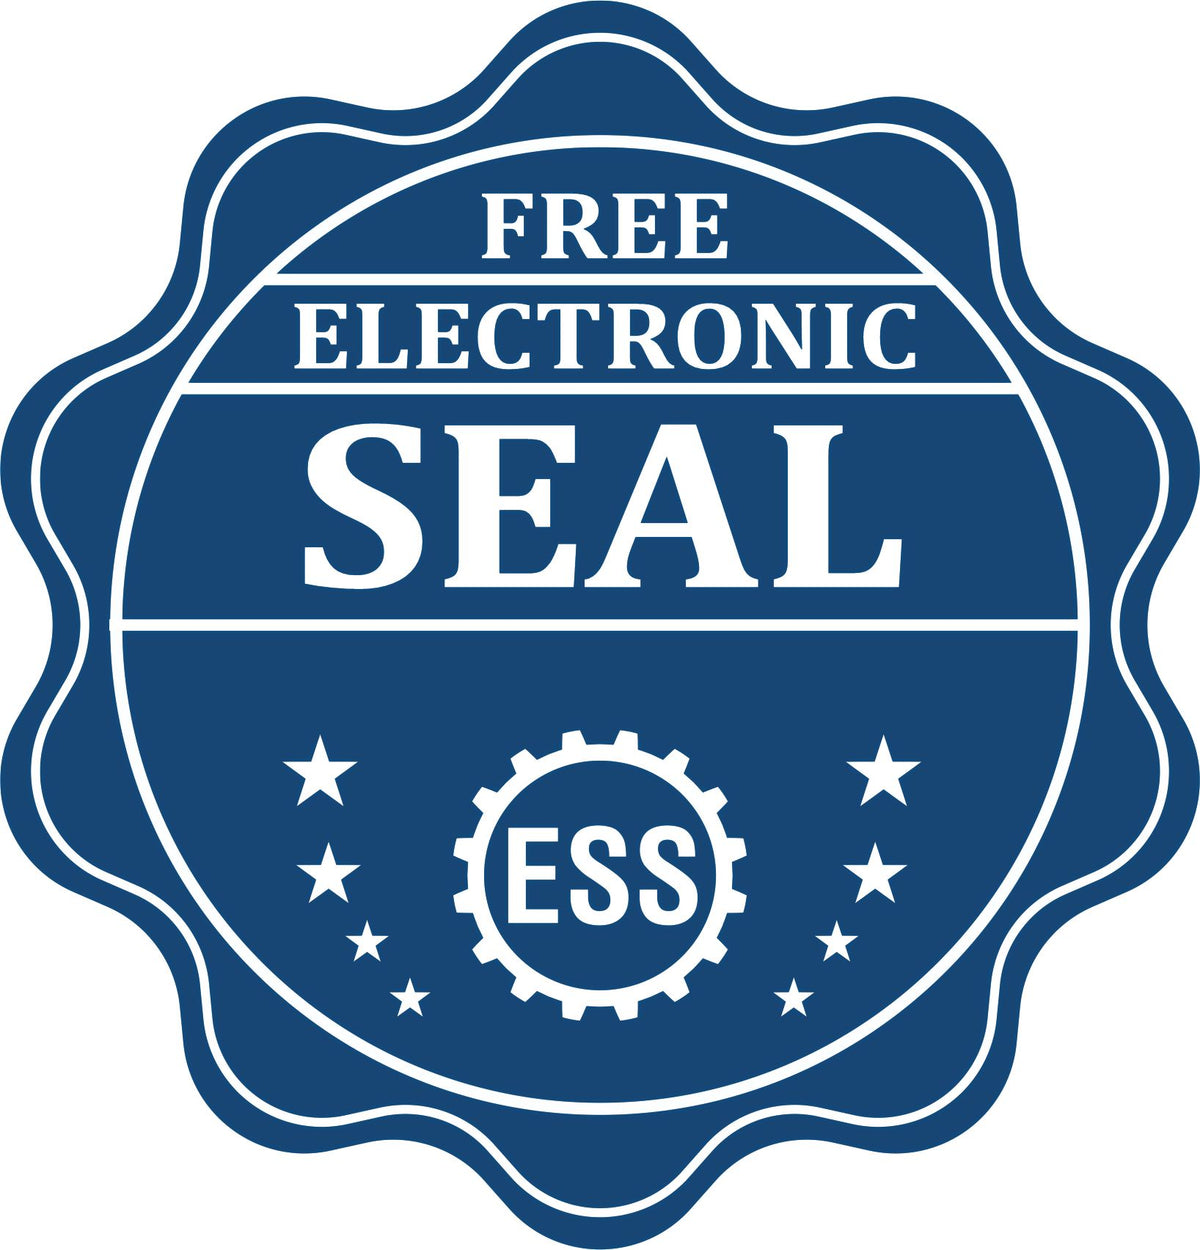 A badge showing a free electronic seal for the State of Alabama Soft Land Surveyor Embossing Seal with stars and the ESS gear on the emblem.